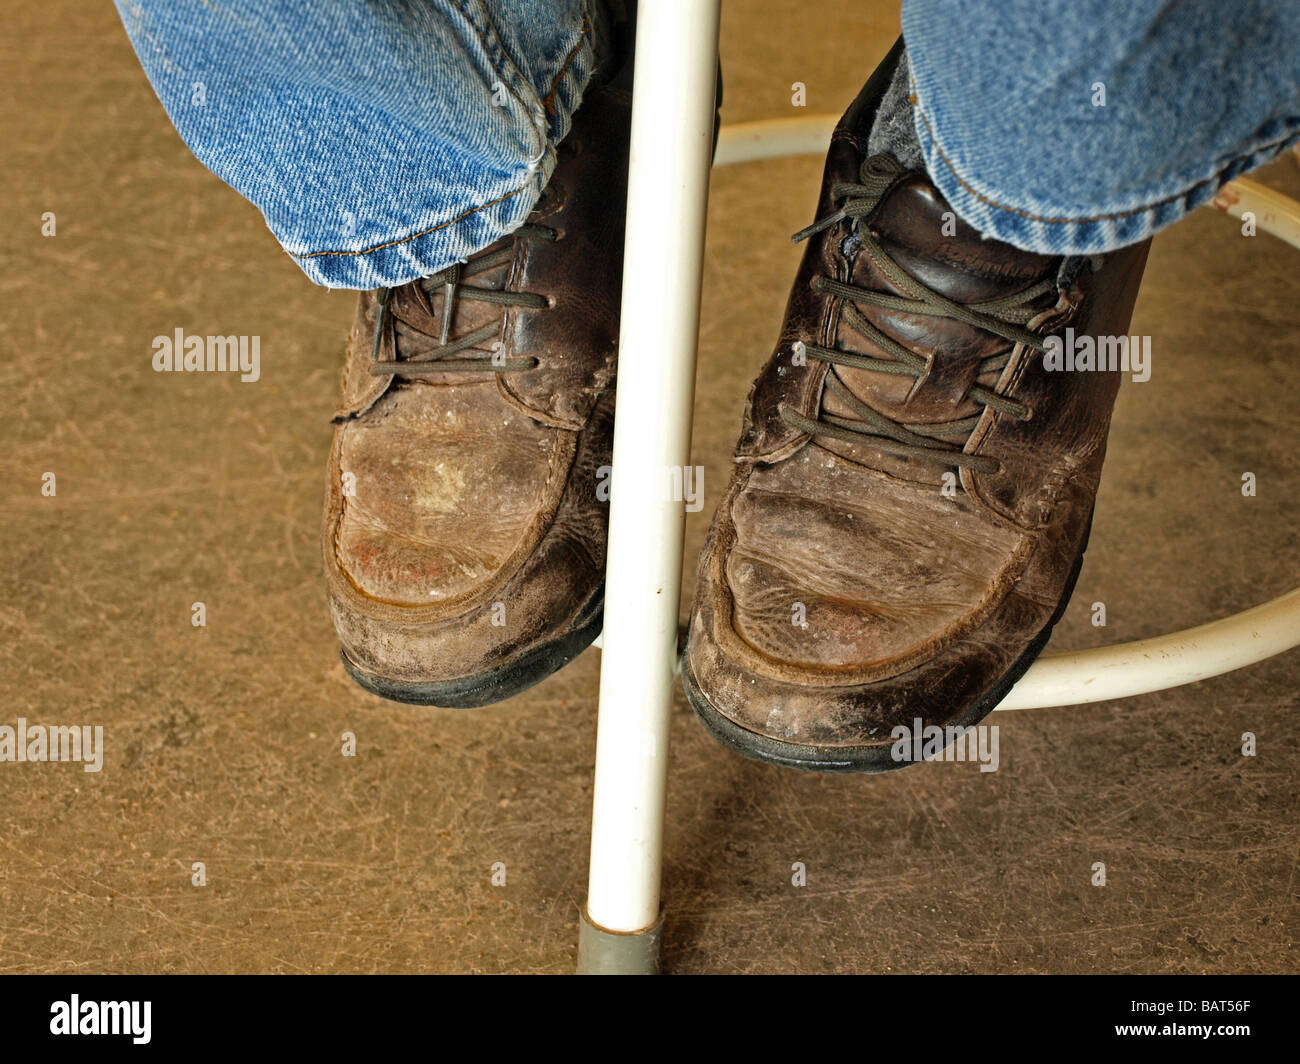 pair of work boots workboots shoes resting on the bottom rung of a stool with bluejeans cuffs visible, brown and worn Stock Photo